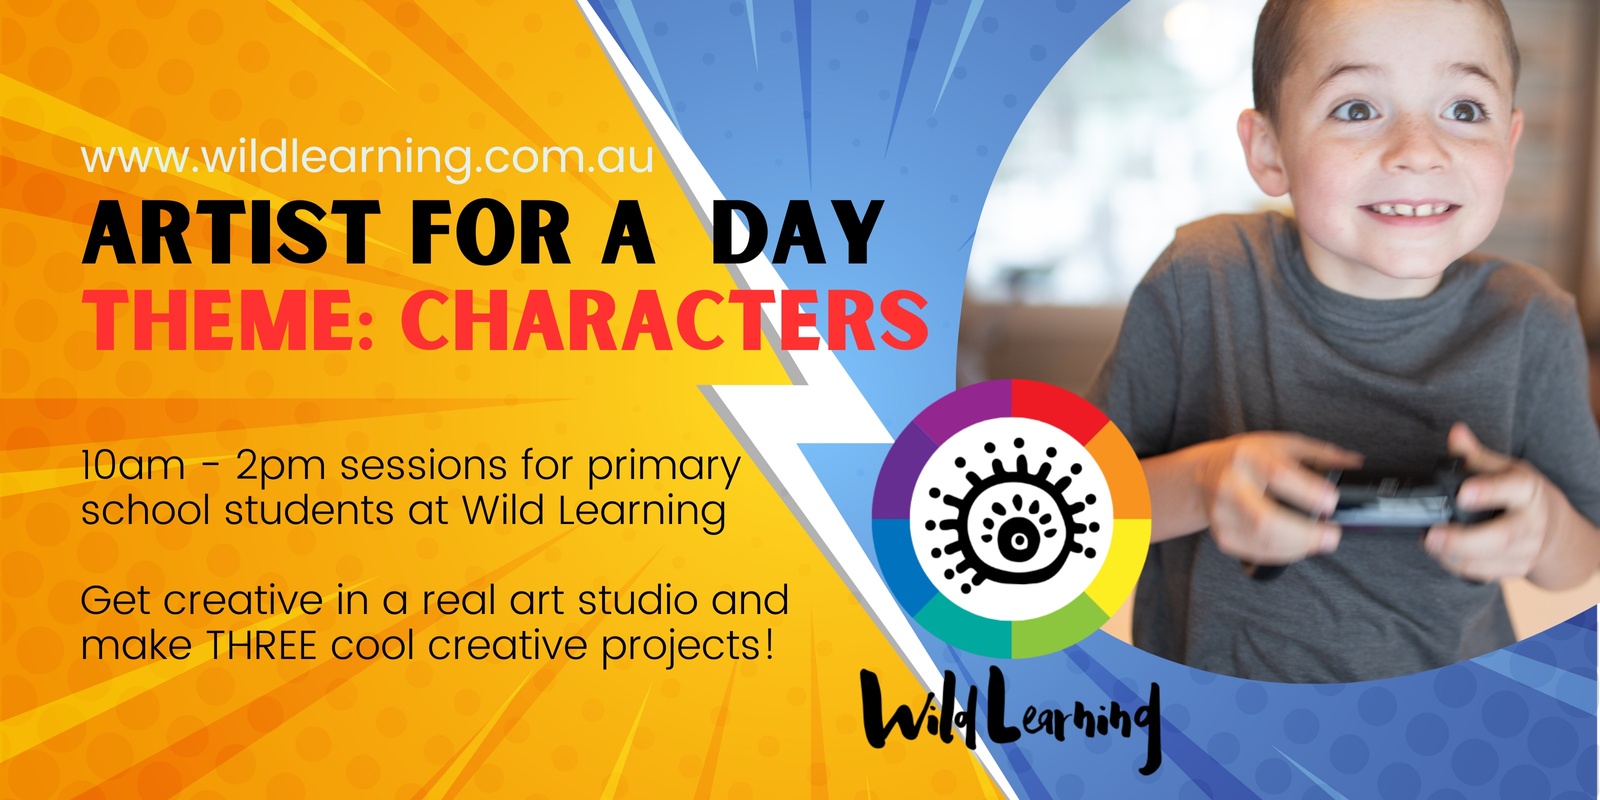 Banner image for Kids! Be an Artist for a Day - CHARACTERS